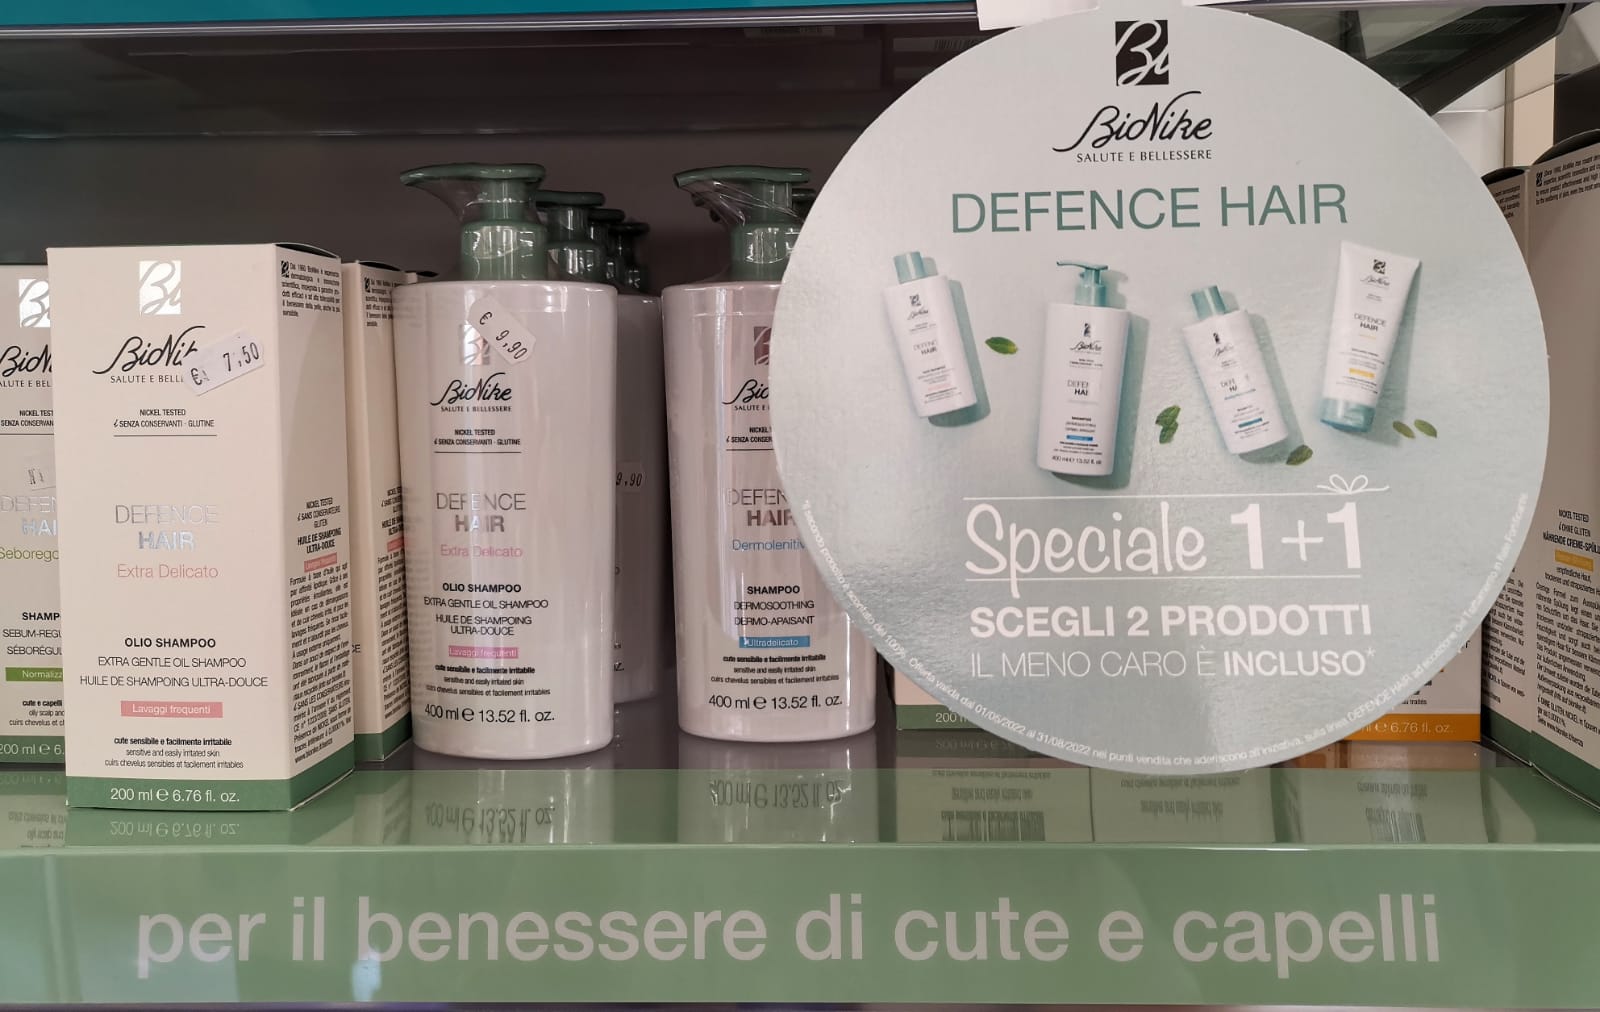 PROMO DEFENCE HAIR SPECIALE 1+1